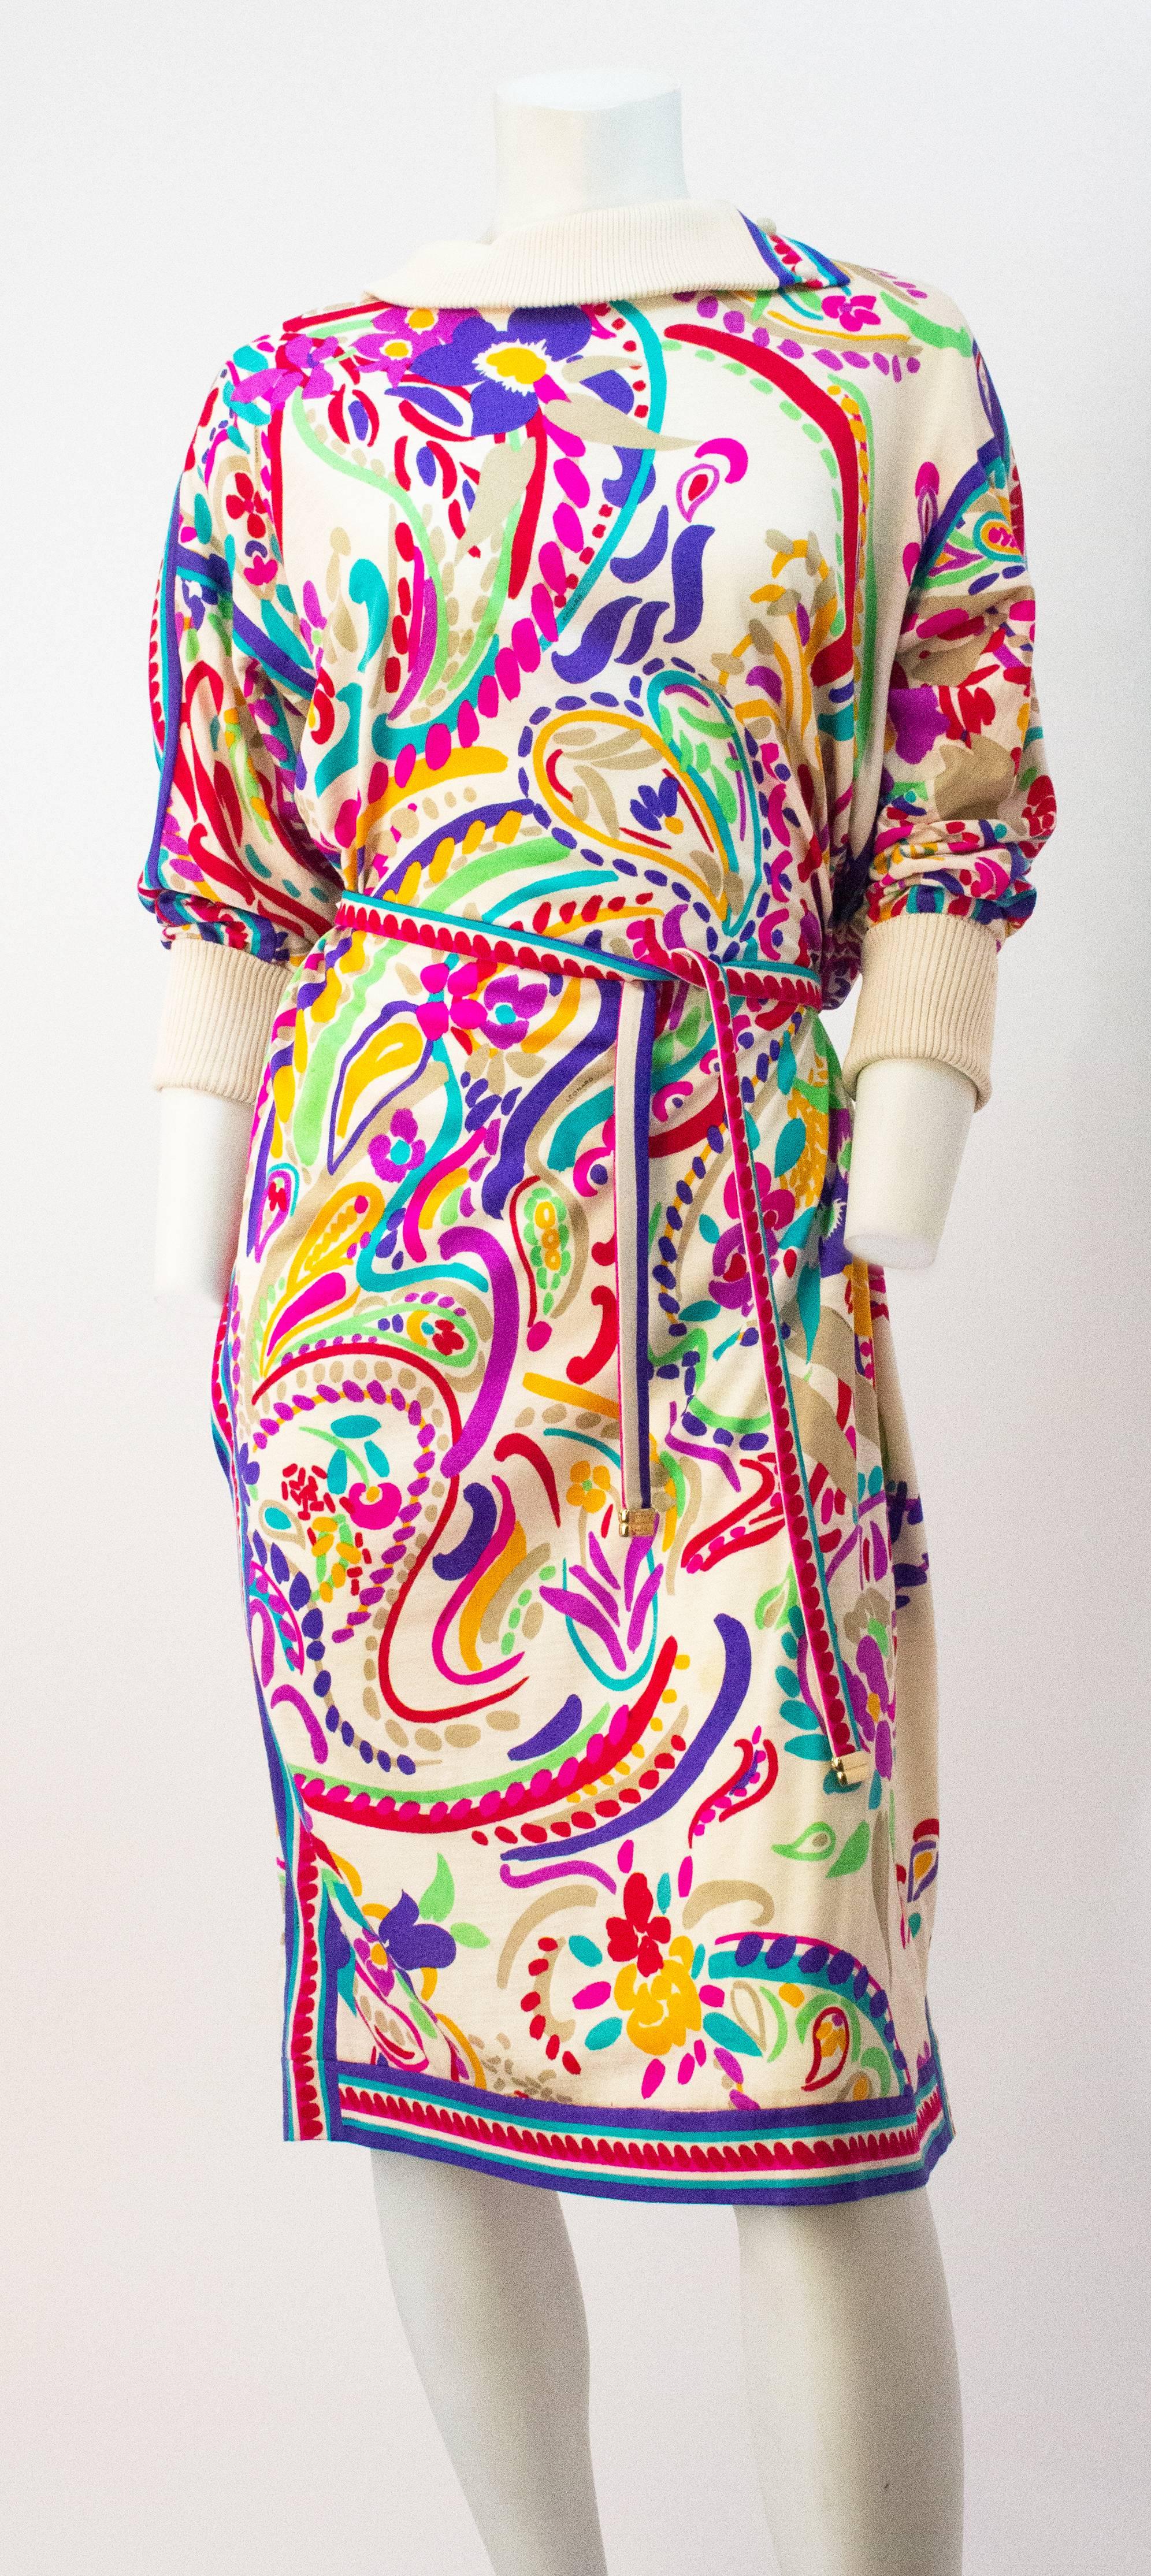 70s Leonard Colorful Paisley Print 3/4 Sleeve Dress. Ribbed cuffs and turn down collar. Pockets. 

Belt: 54 1/2 inches
